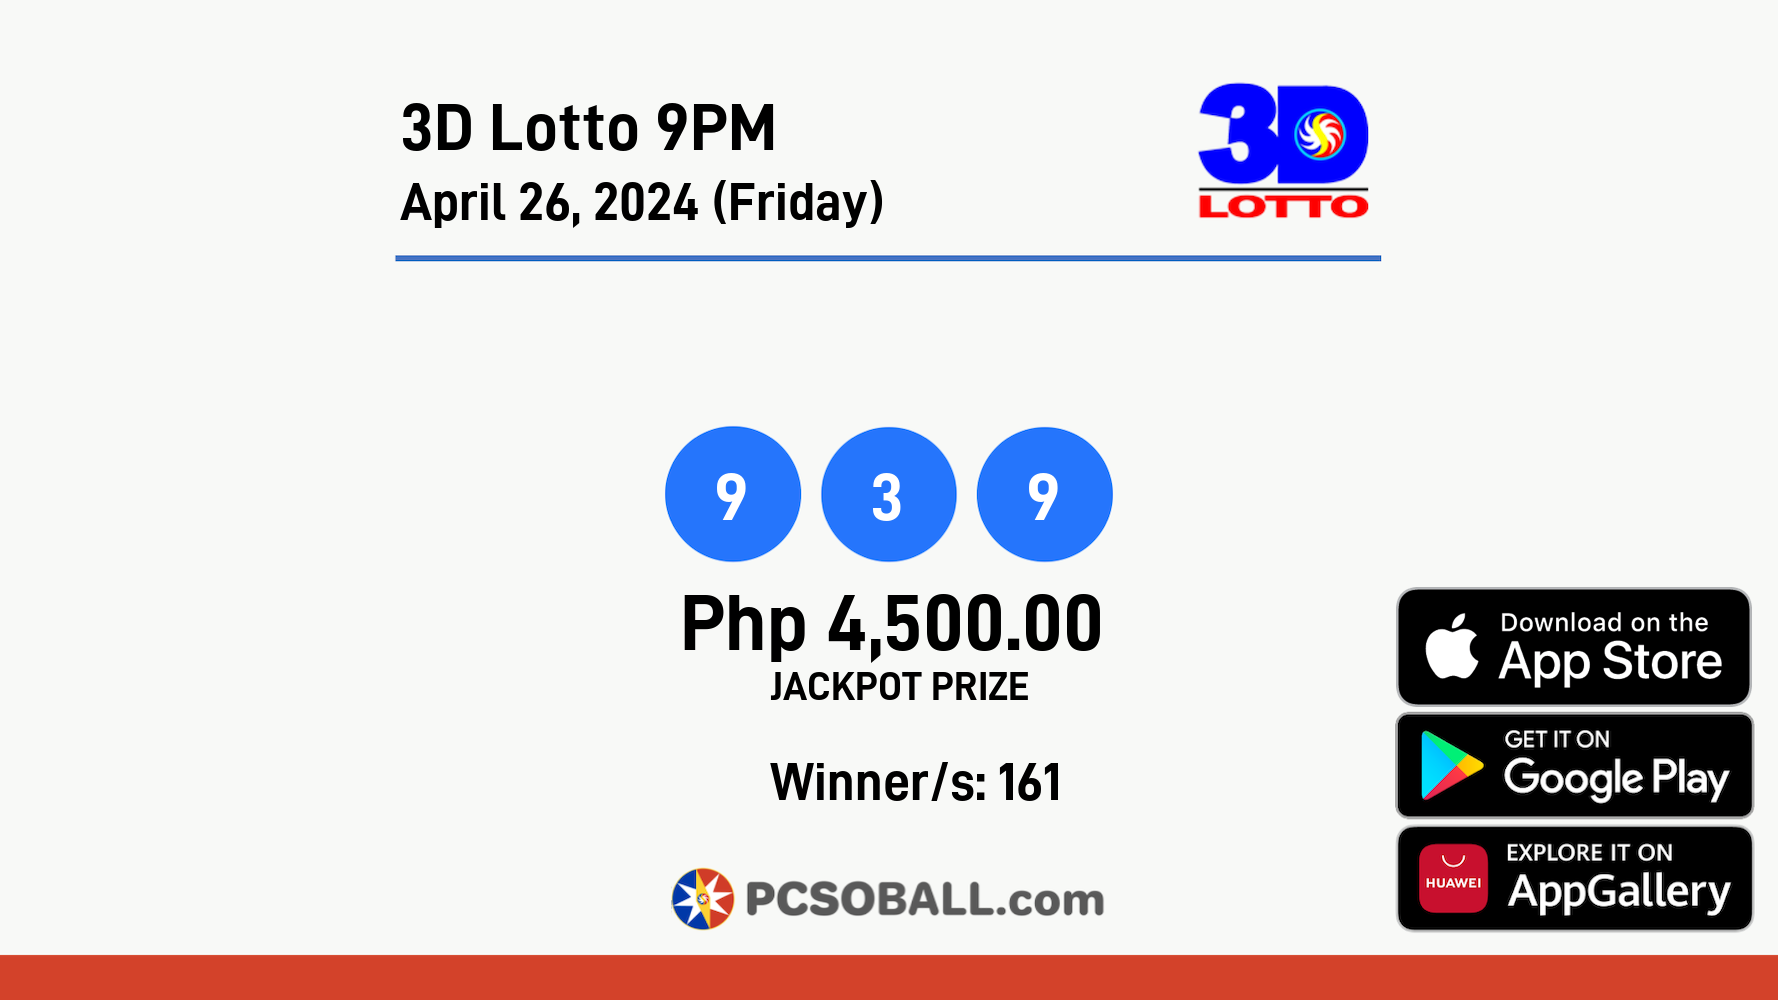 3D Lotto 9PM April 26, 2024 (Friday) Result